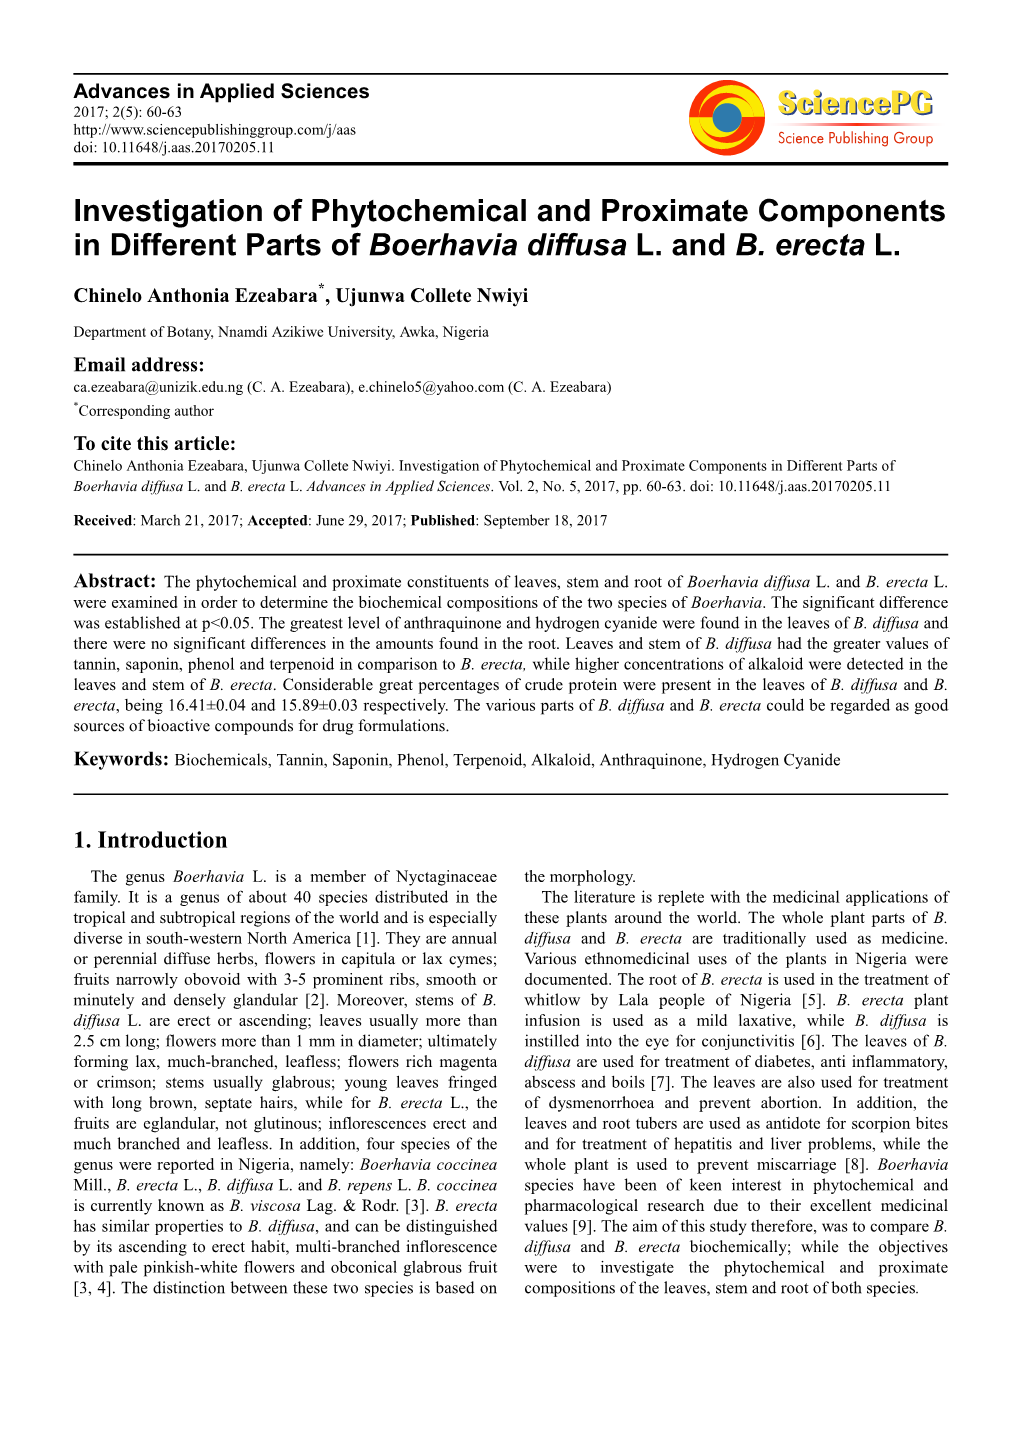 Investigation of Phytochemical and Proximate Components in Different Parts of Boerhavia Diffusa L